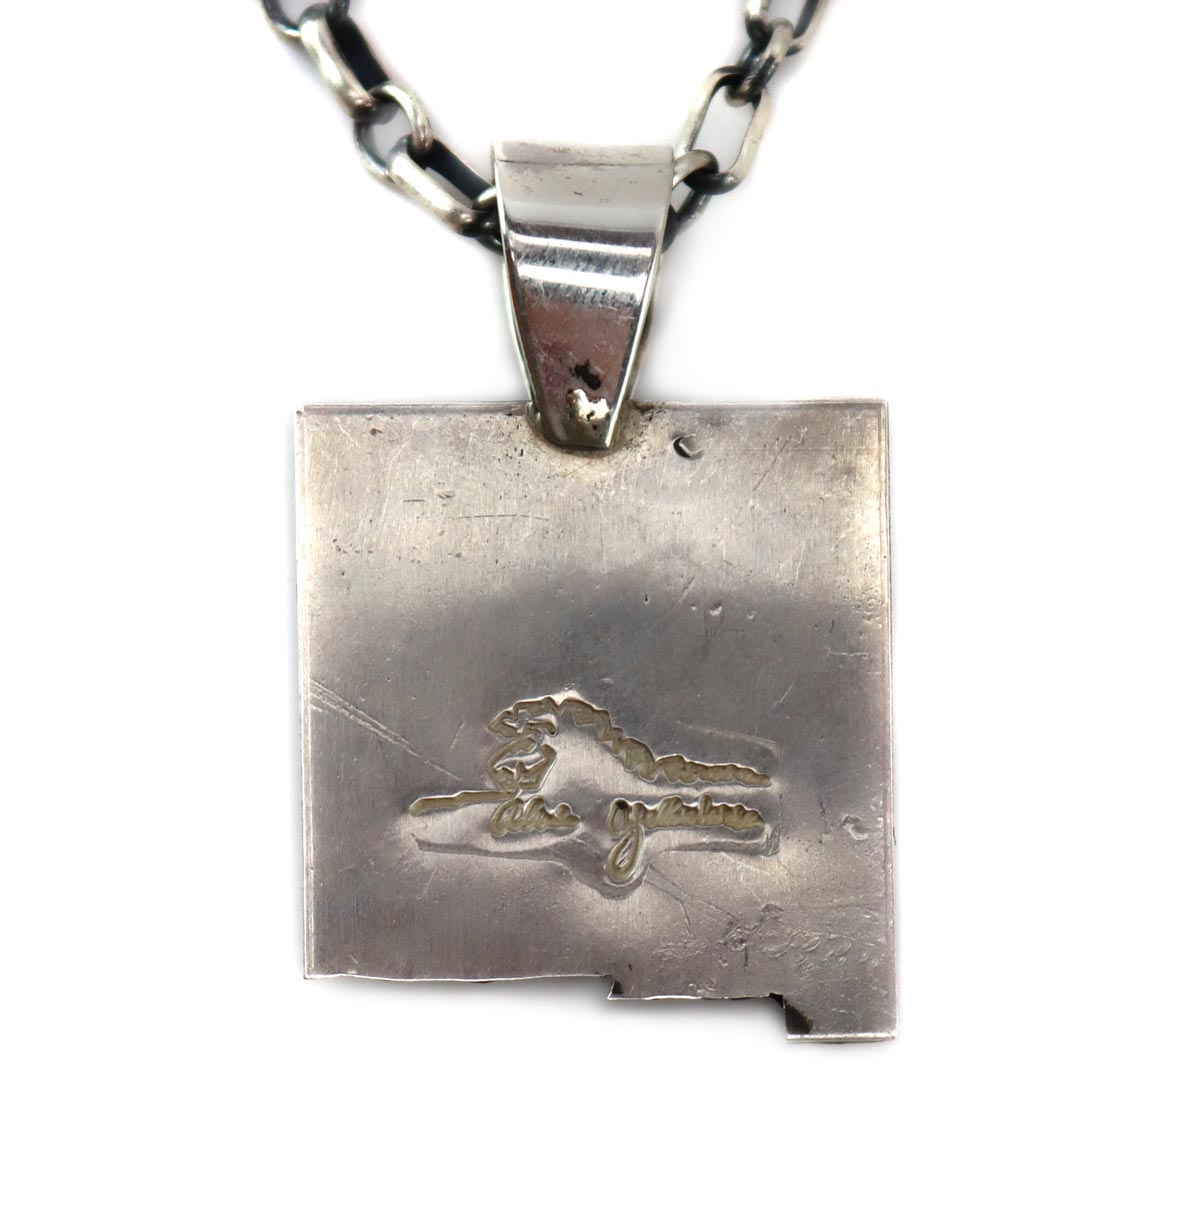 Alvin Yellowhorse (b. 1968) - Navajo Contemporary Turquoise and Dimpled Silver New Mexico Pendant with Handmade Chain, 25" length